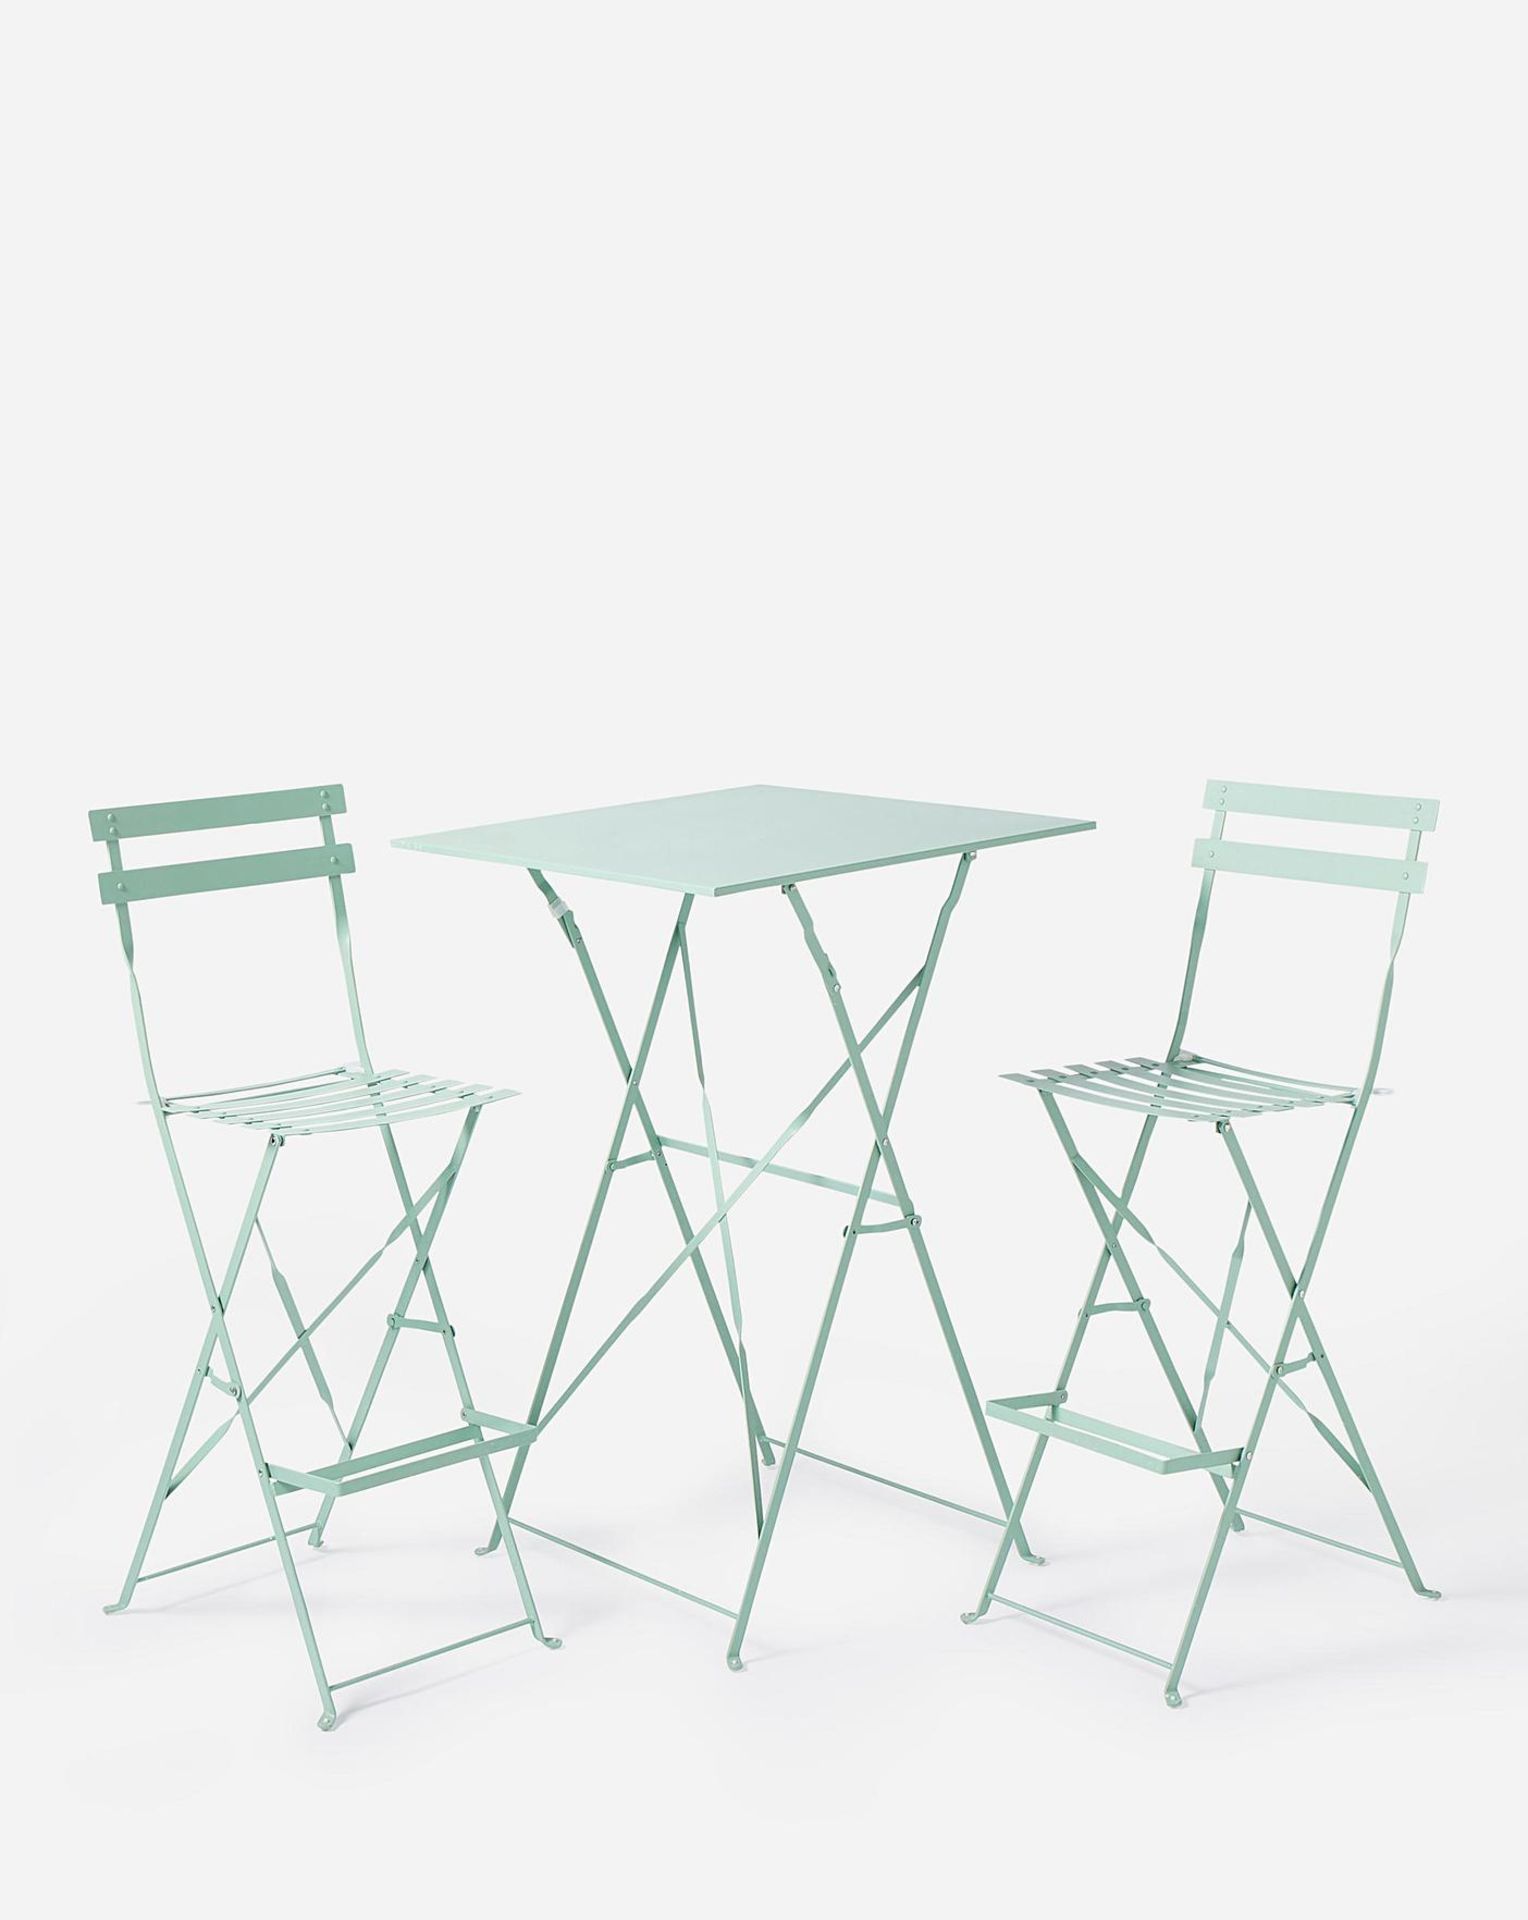 TRADE PALLET TO CONTAIN 6x BRAND NEW Palma Bistro Bar Set GREEN. RRP £159 EACH. Liven up your - Image 2 of 3